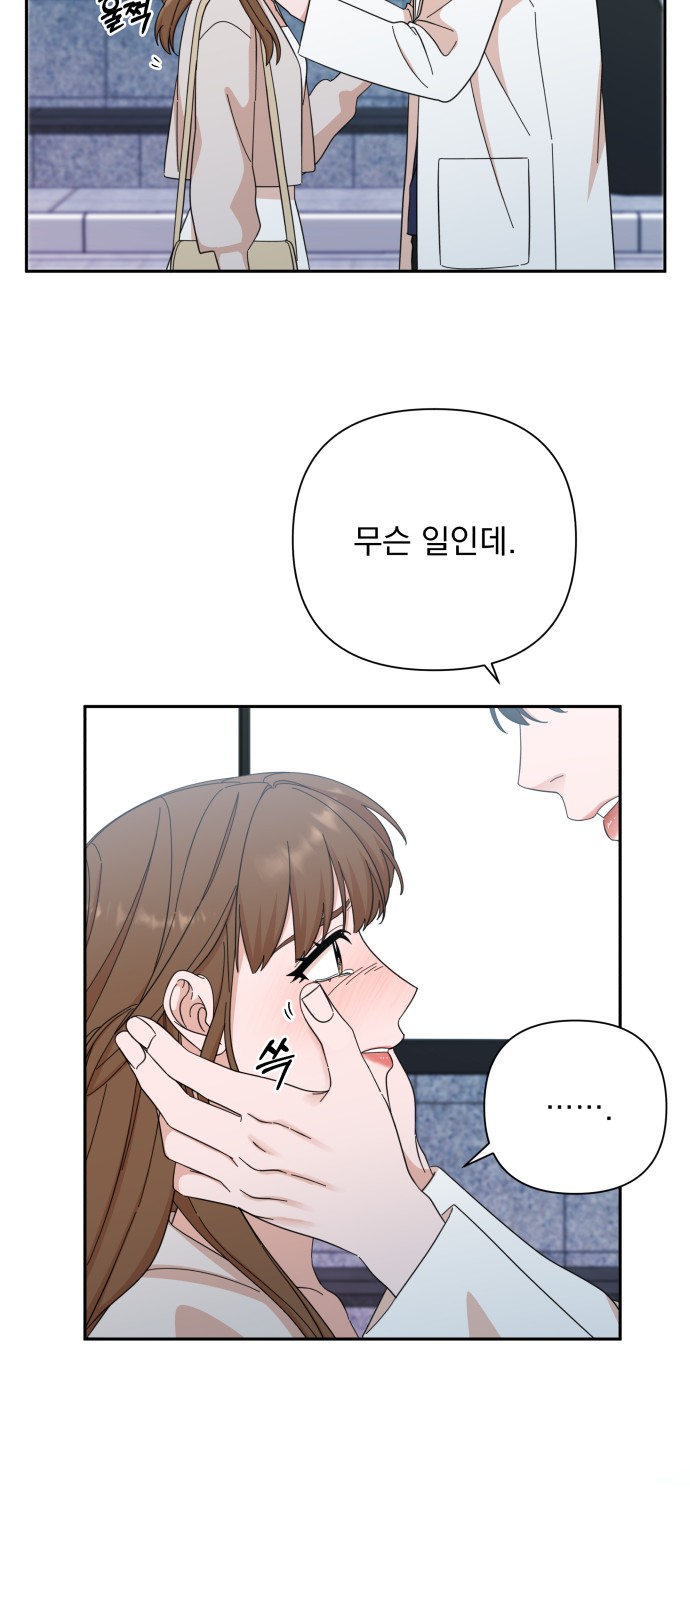 The Man With Pretty Lips - Chapter 48 - Page 79